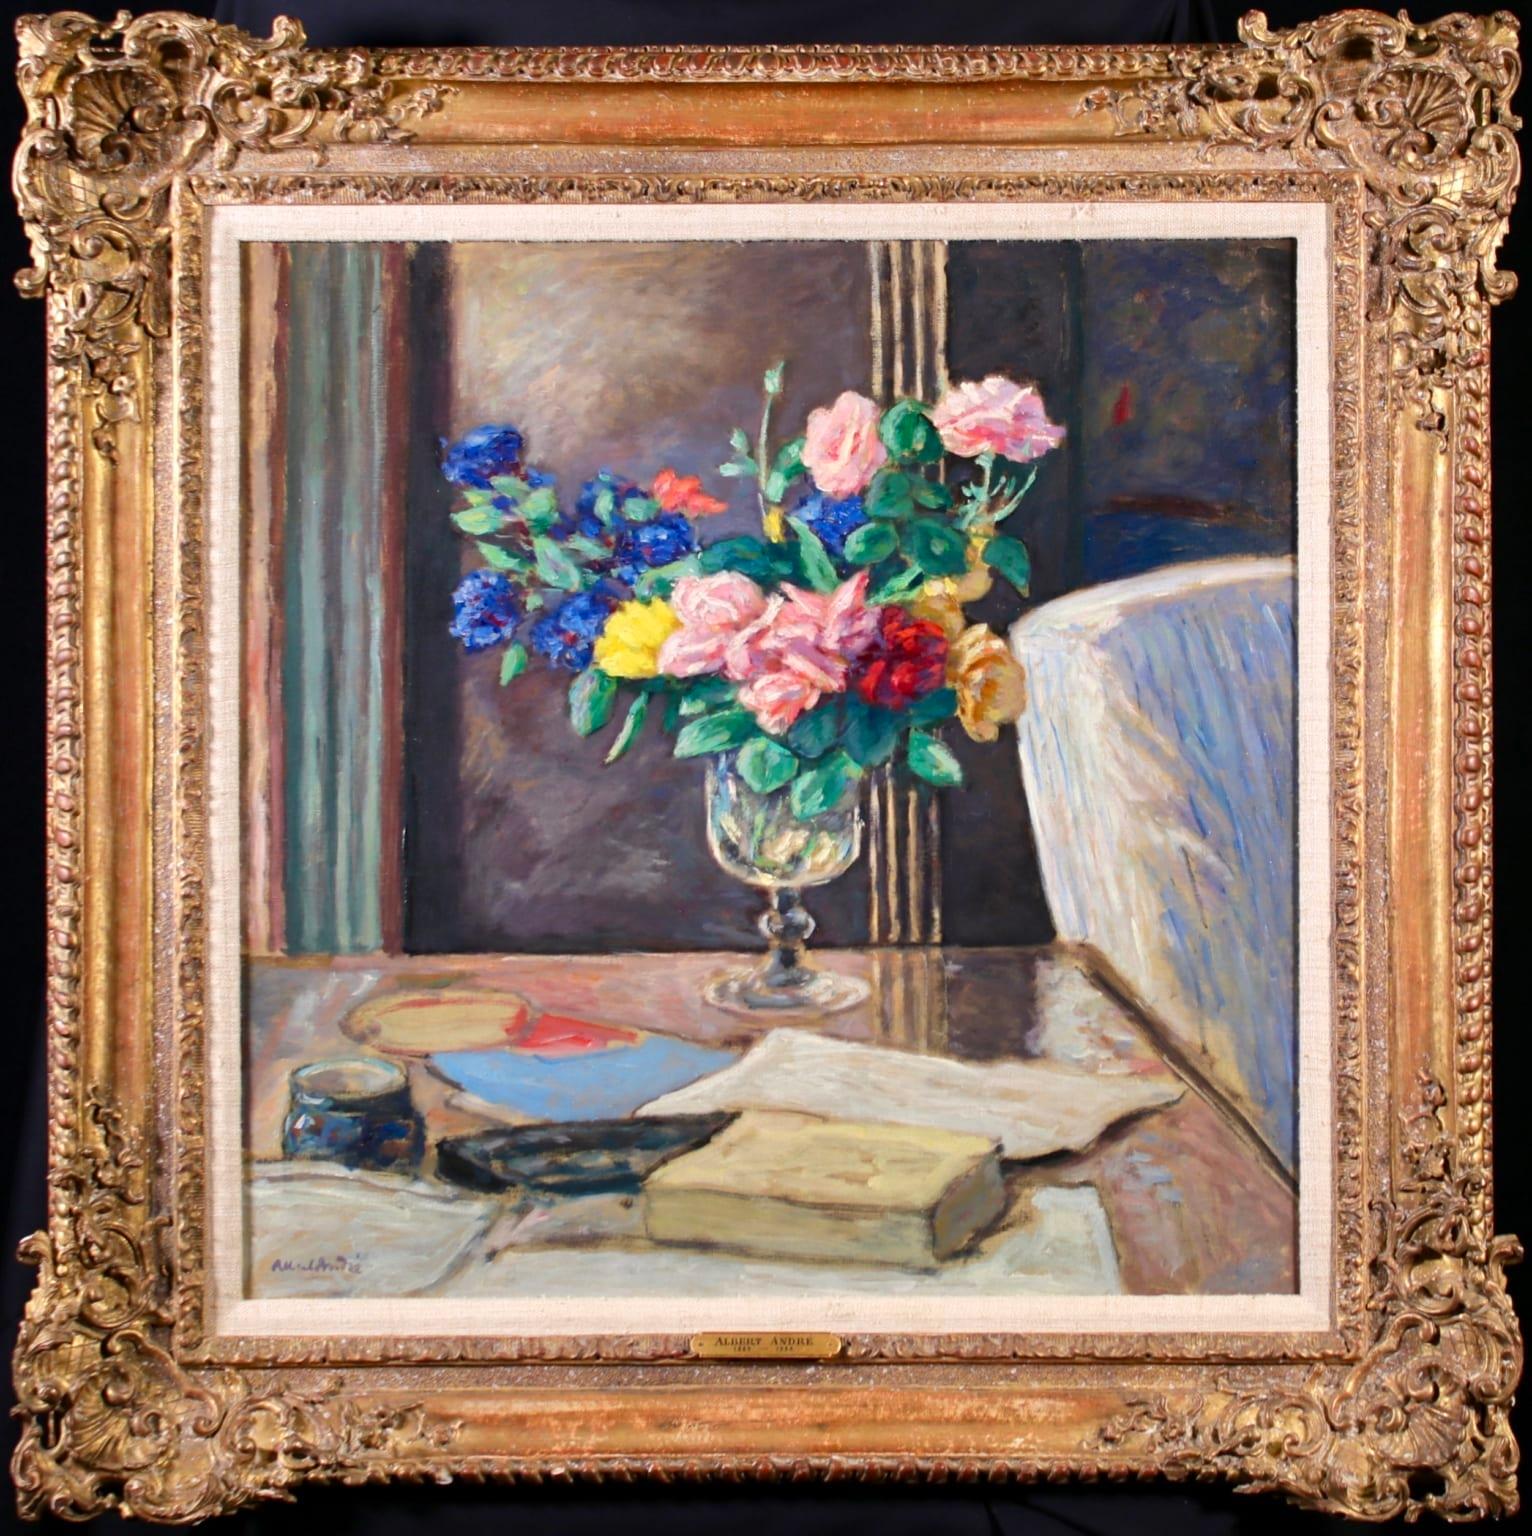 Roses dans un verre - Post Impressionist Still Life Oil Painting by Albert Andre